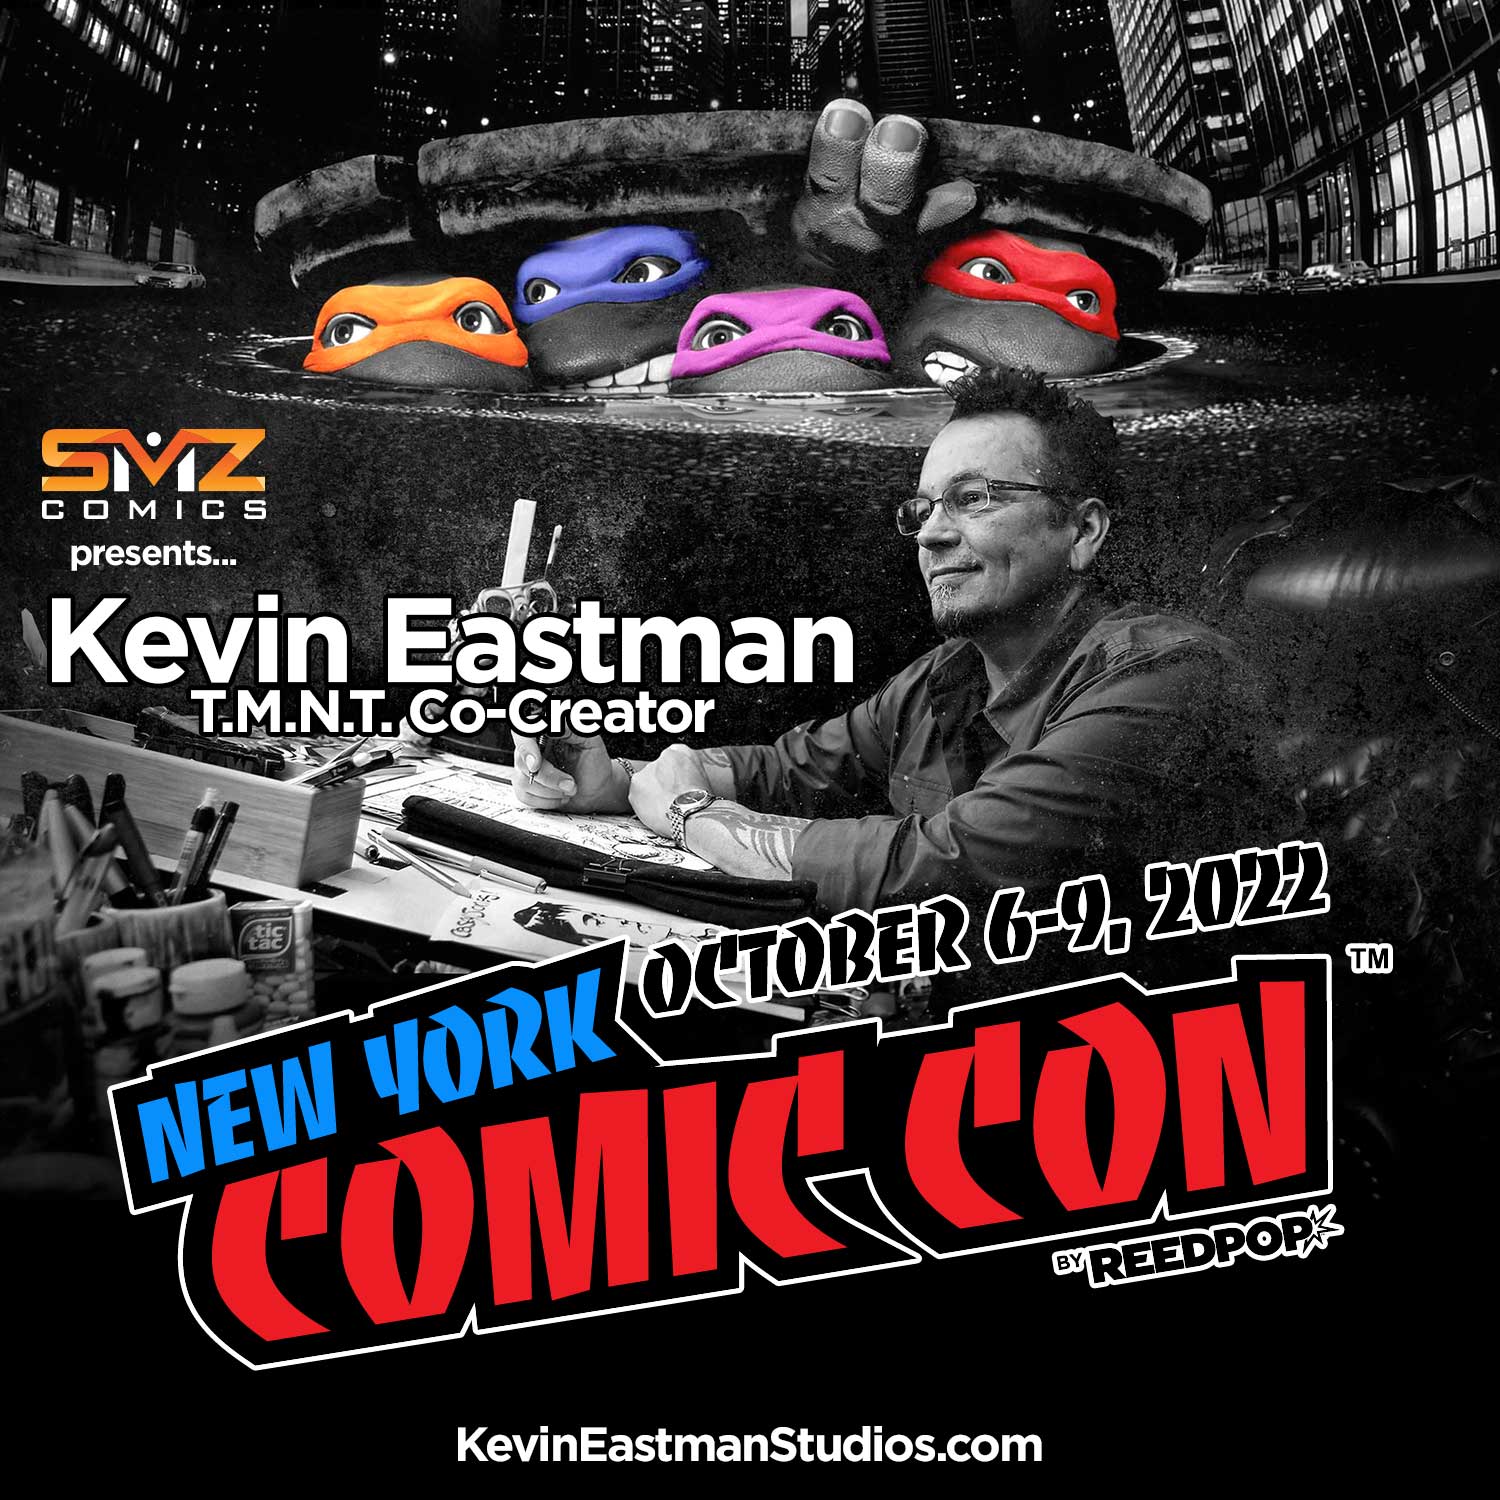 New York Comic Con - here we are!